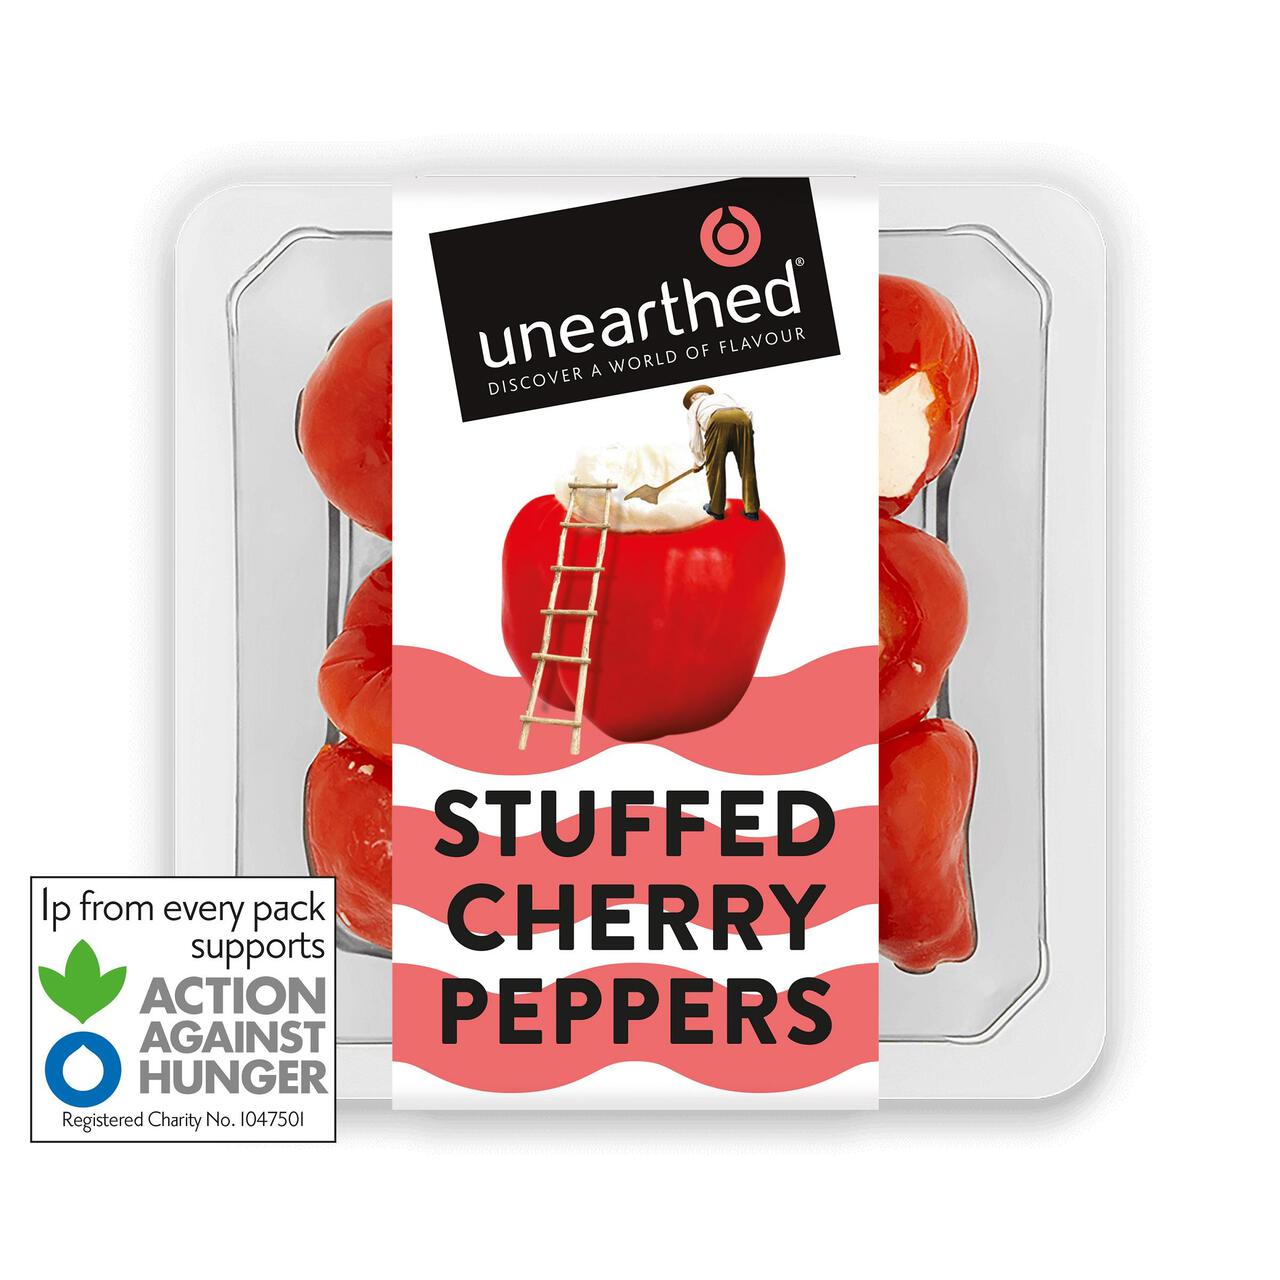 Unearthed Stuffed Cherry Peppers Cream Cheese & Paprika 125g